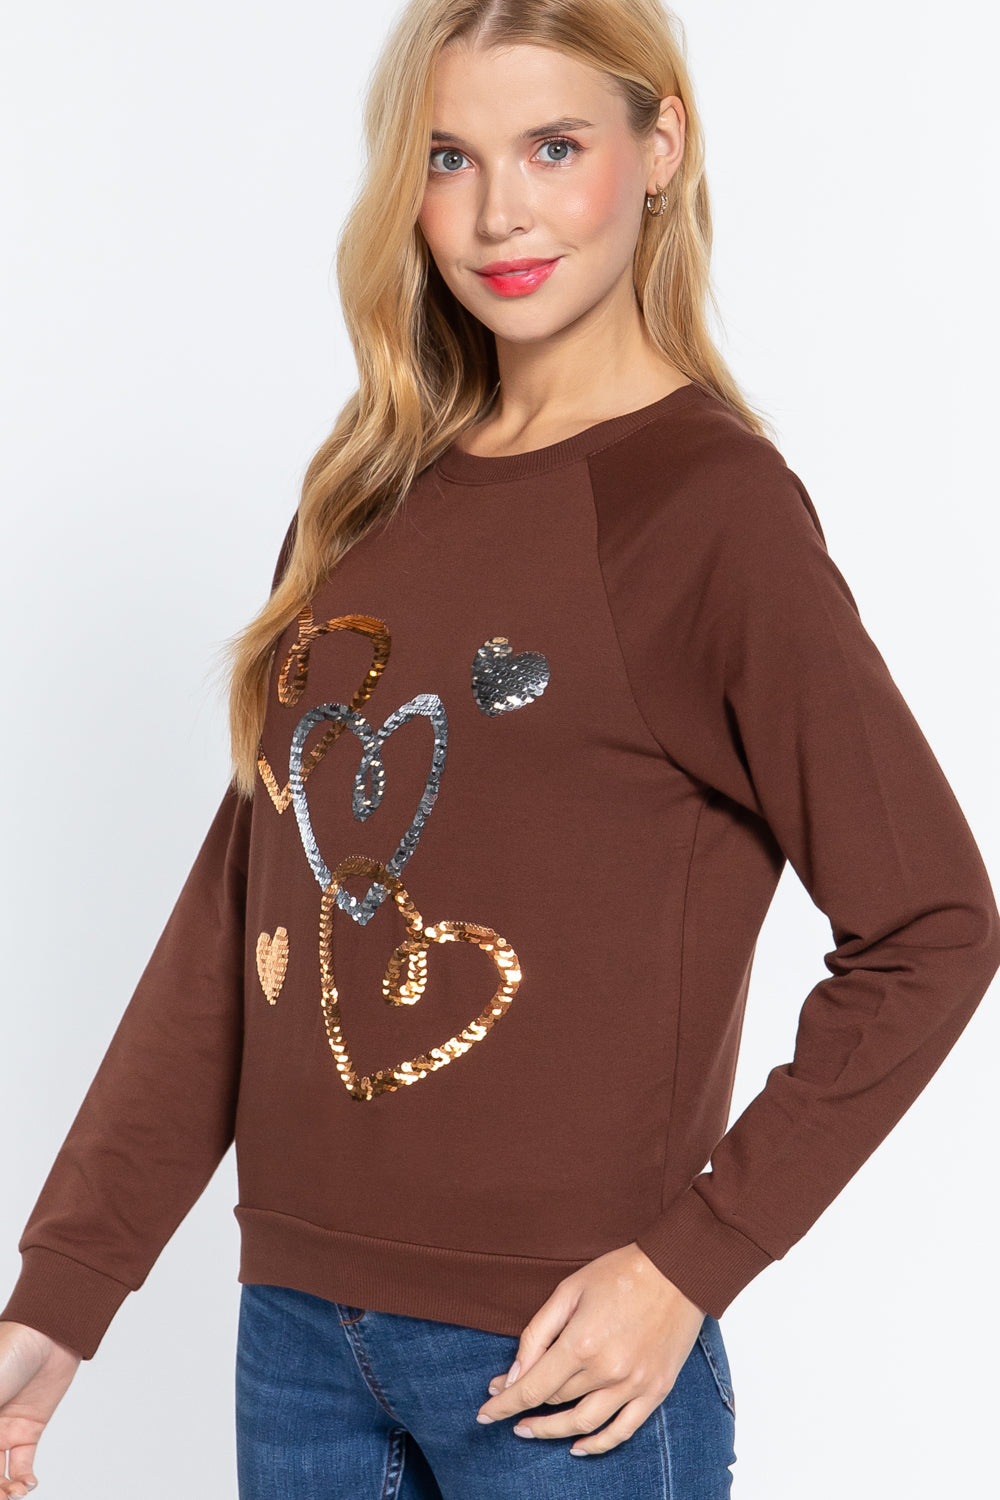 Sepia Brown Sequins French Terry Crewneck Sweatshirt Pullover Top Shirts & Tops jehouze 